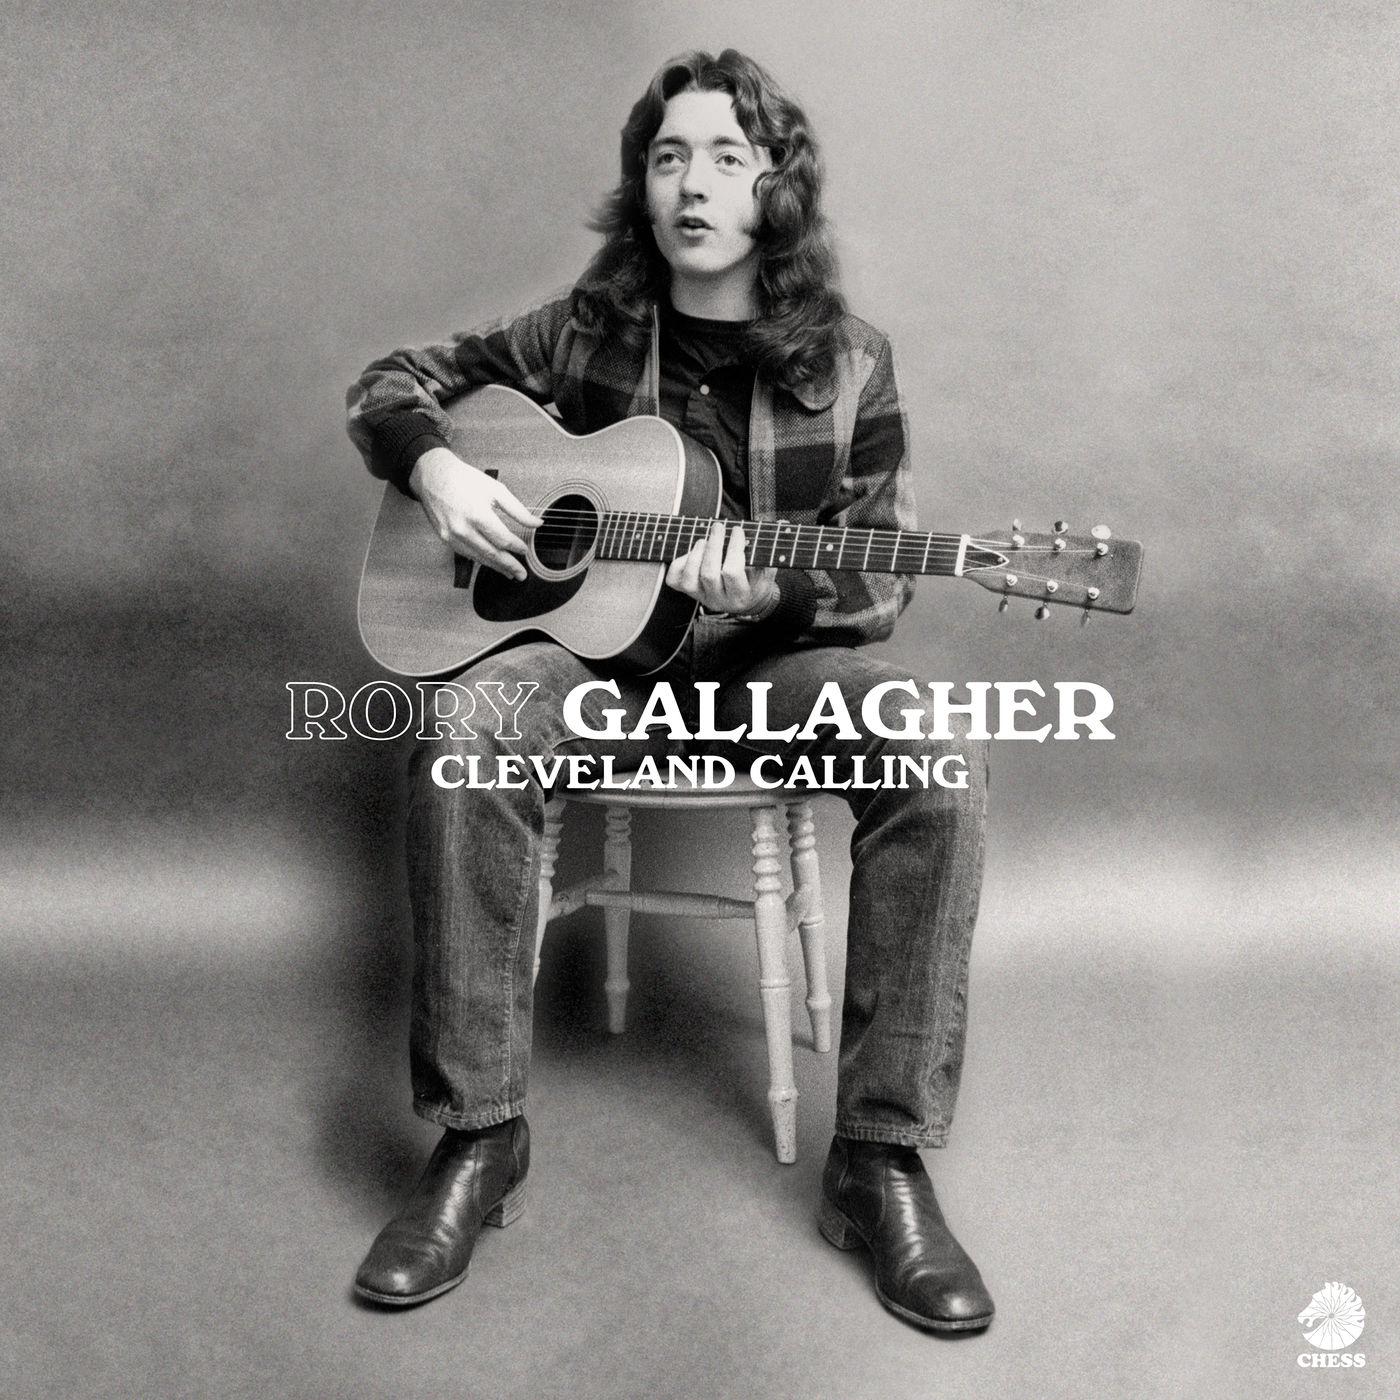 Rory Gallagher - 2020 - Cleveland Calling [2020 Chess Records]